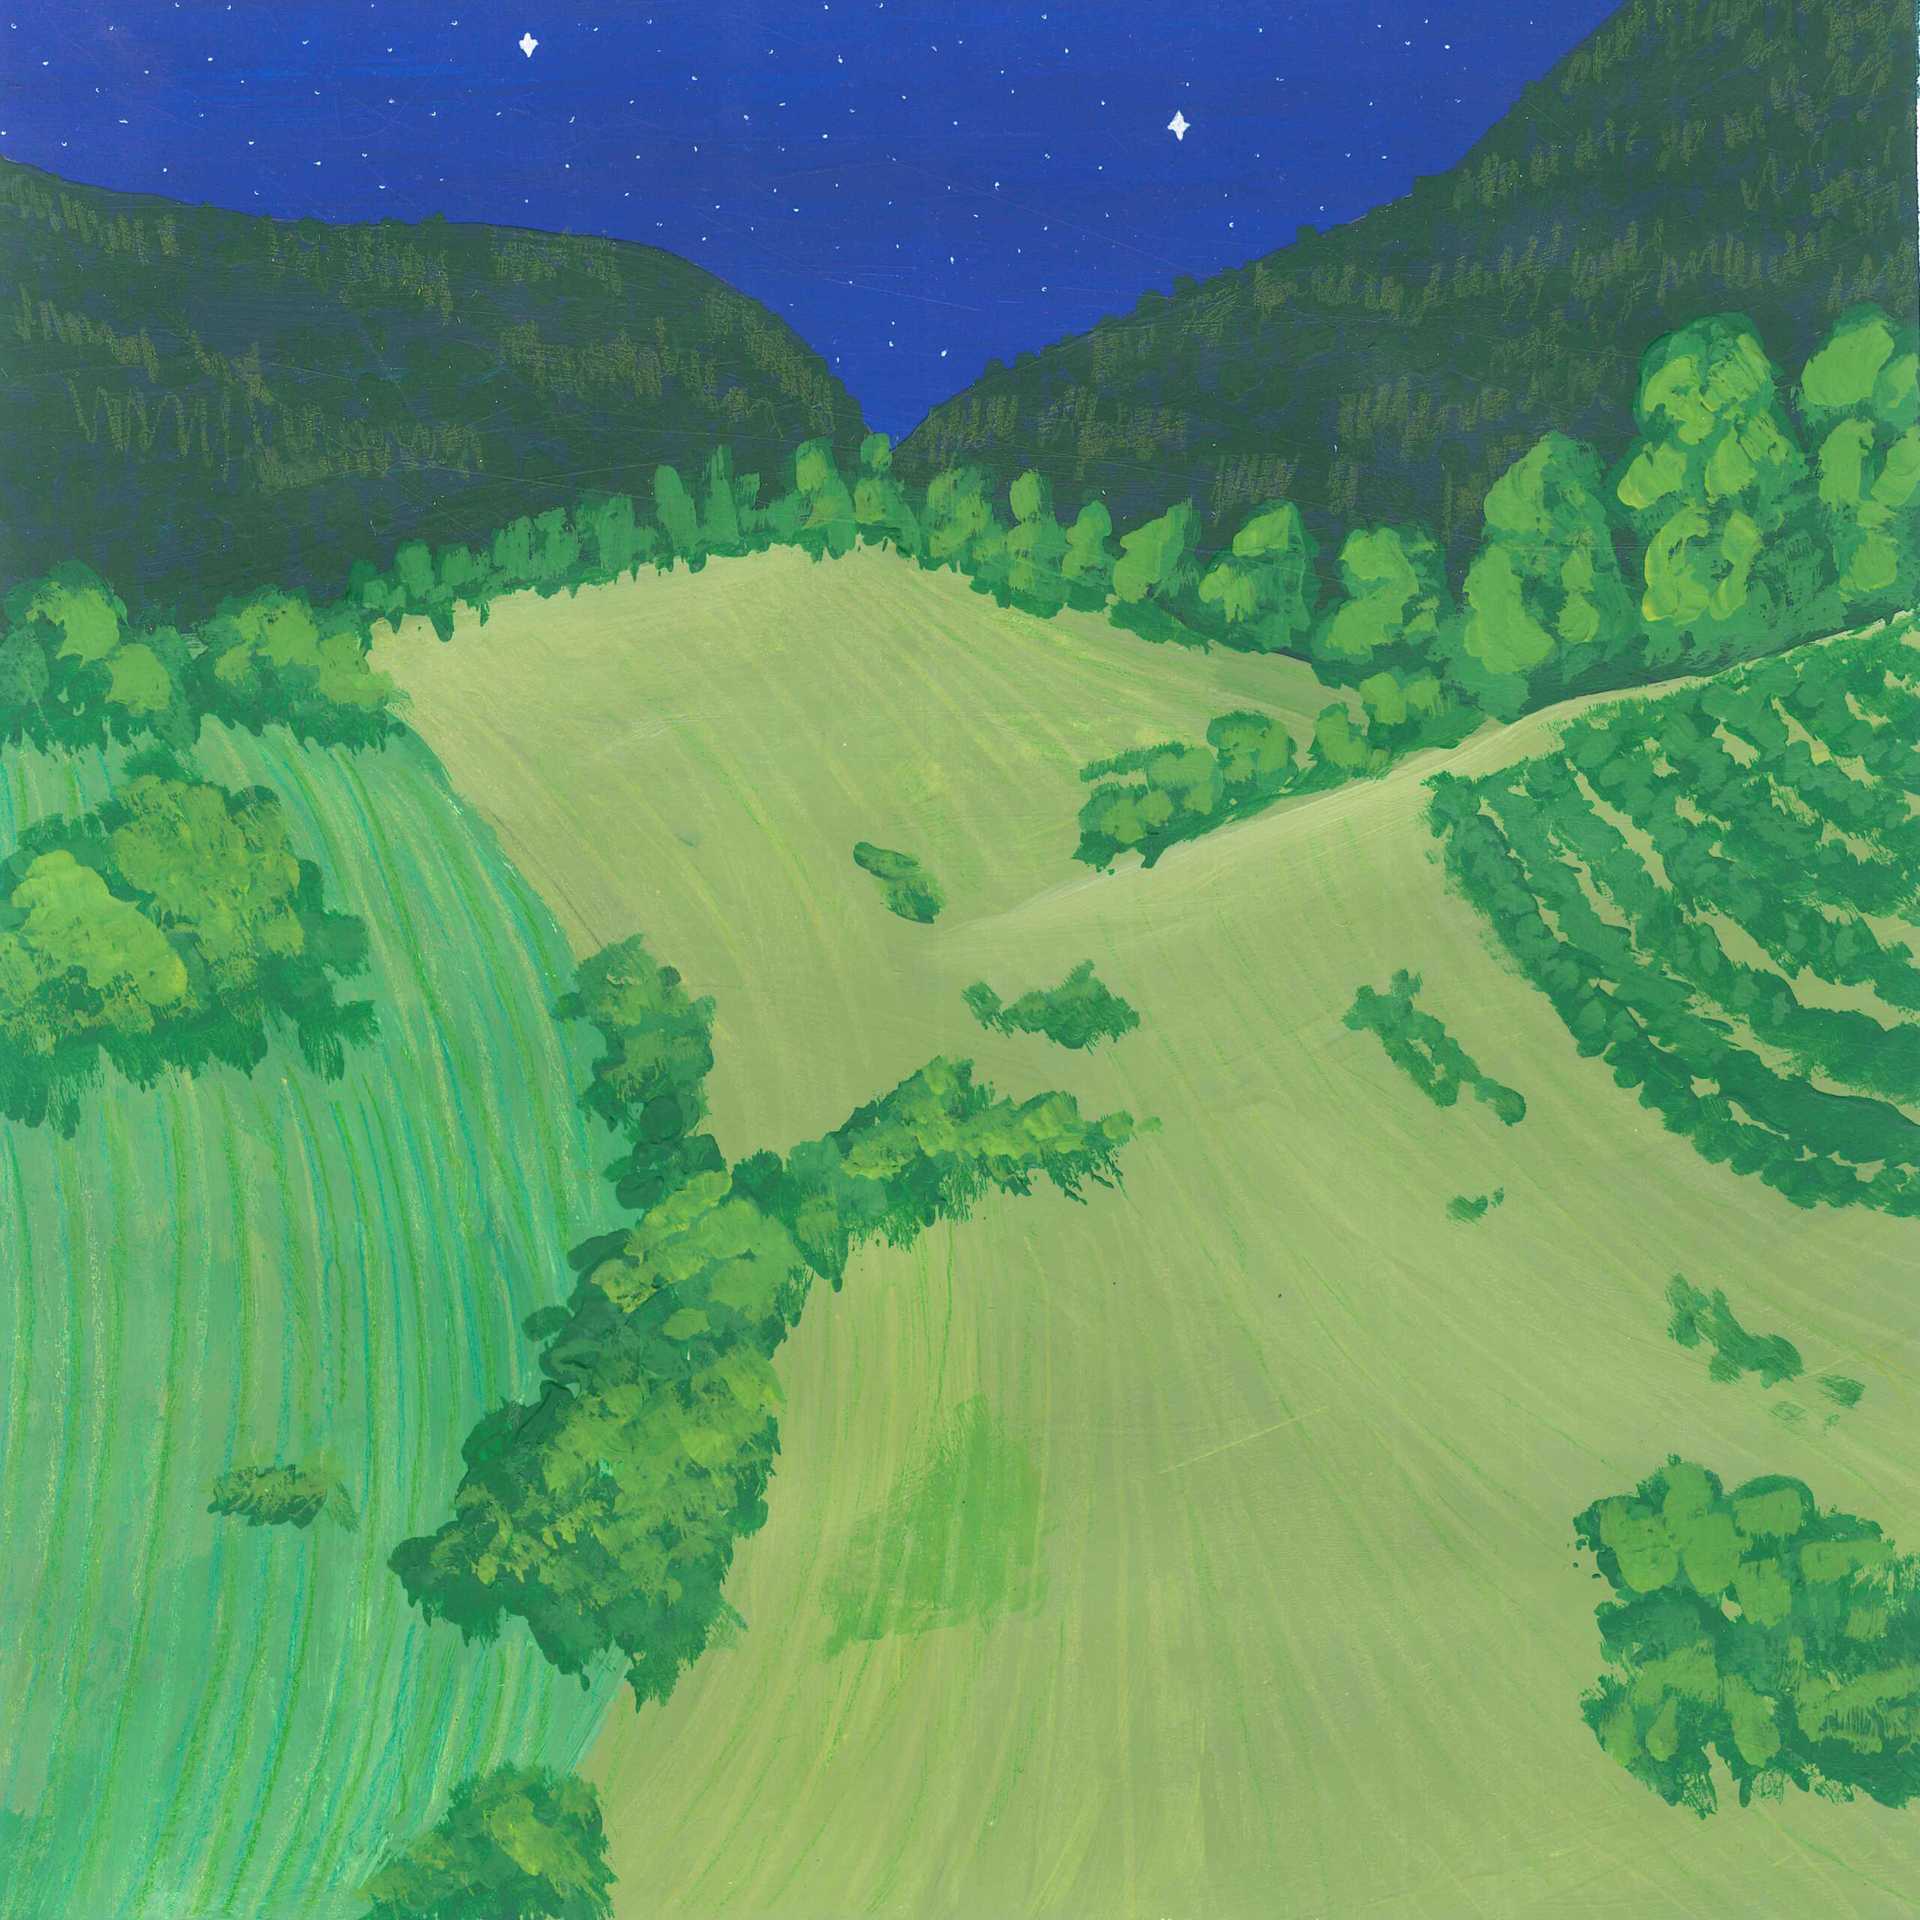 Windy Night with crickets, pipistrelles, tawny owl and stealthy creatures - nature landscape painting - earth.fm